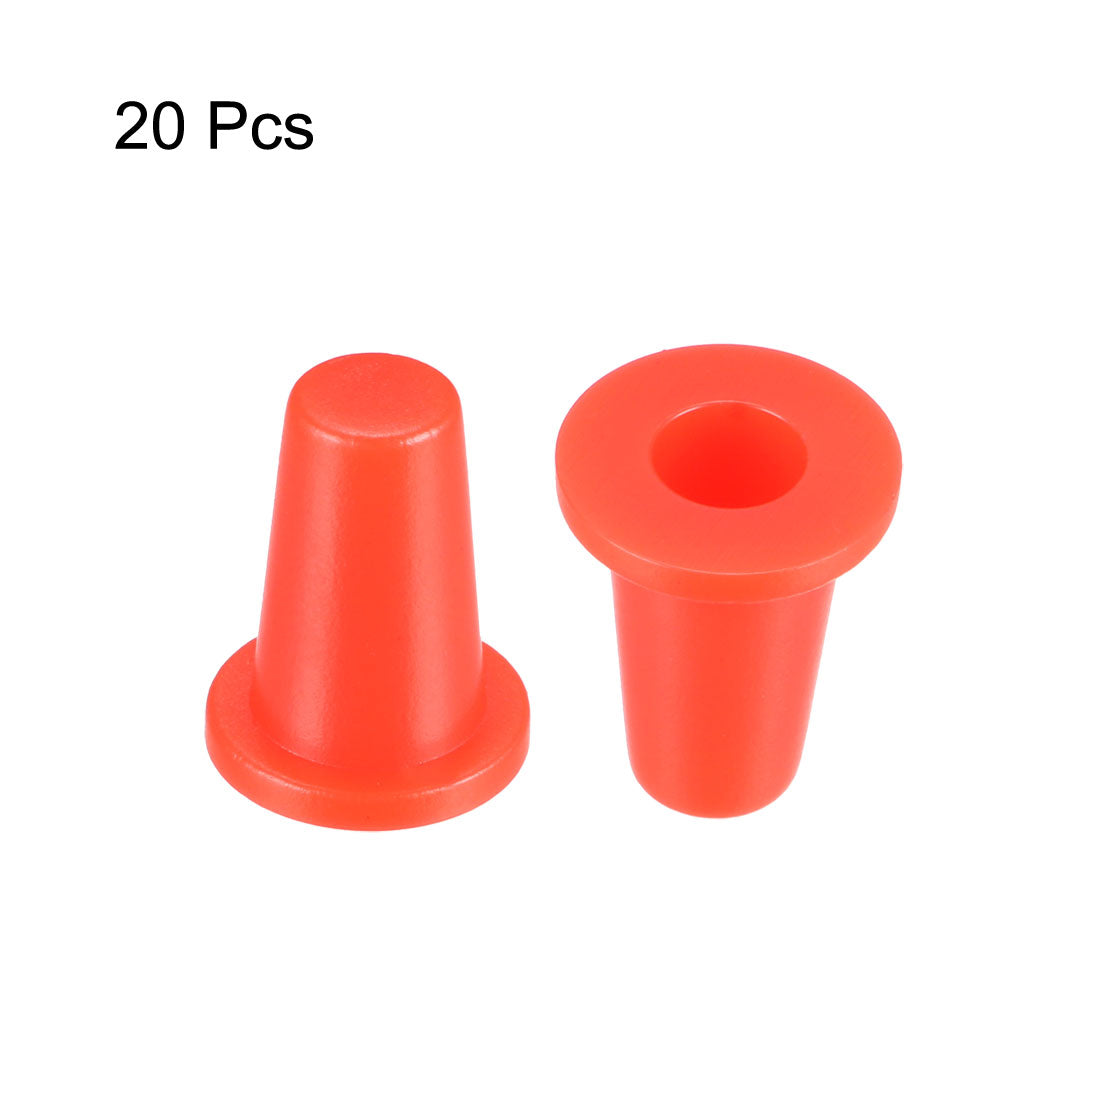 uxcell Uxcell 20Pcs 3.5mm Hole Dia Plastic Push Button Tactile Switch Caps Cover Keycaps Protector Red for 6x6 Micro Switch